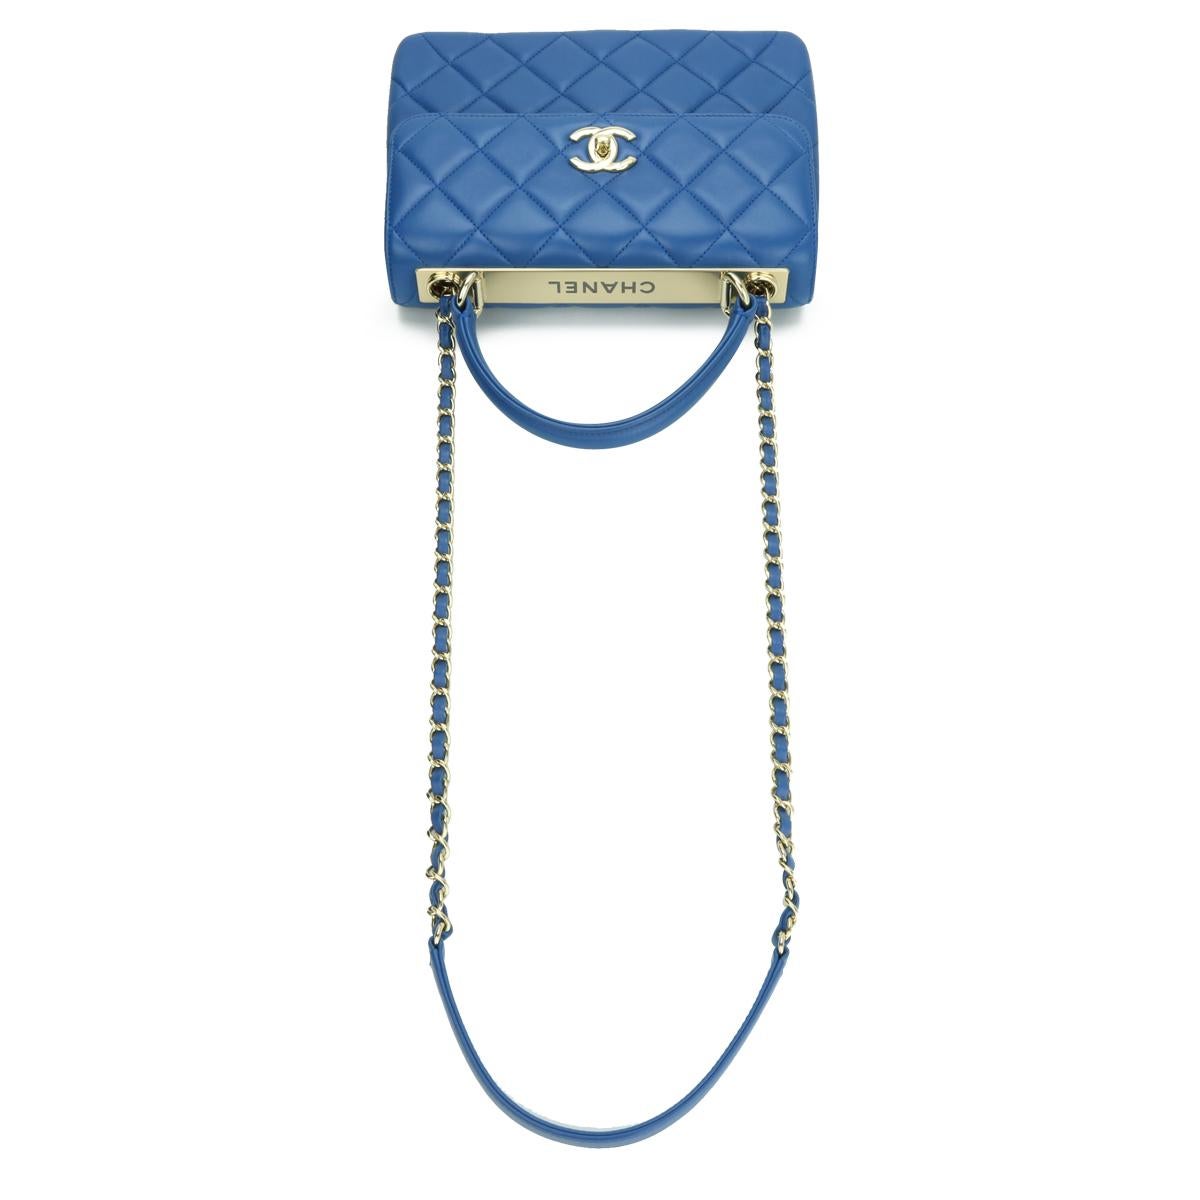 CHANEL Trendy CC Bag Small Blue Lambskin Light Gold Hardware 2019 For Sale 6